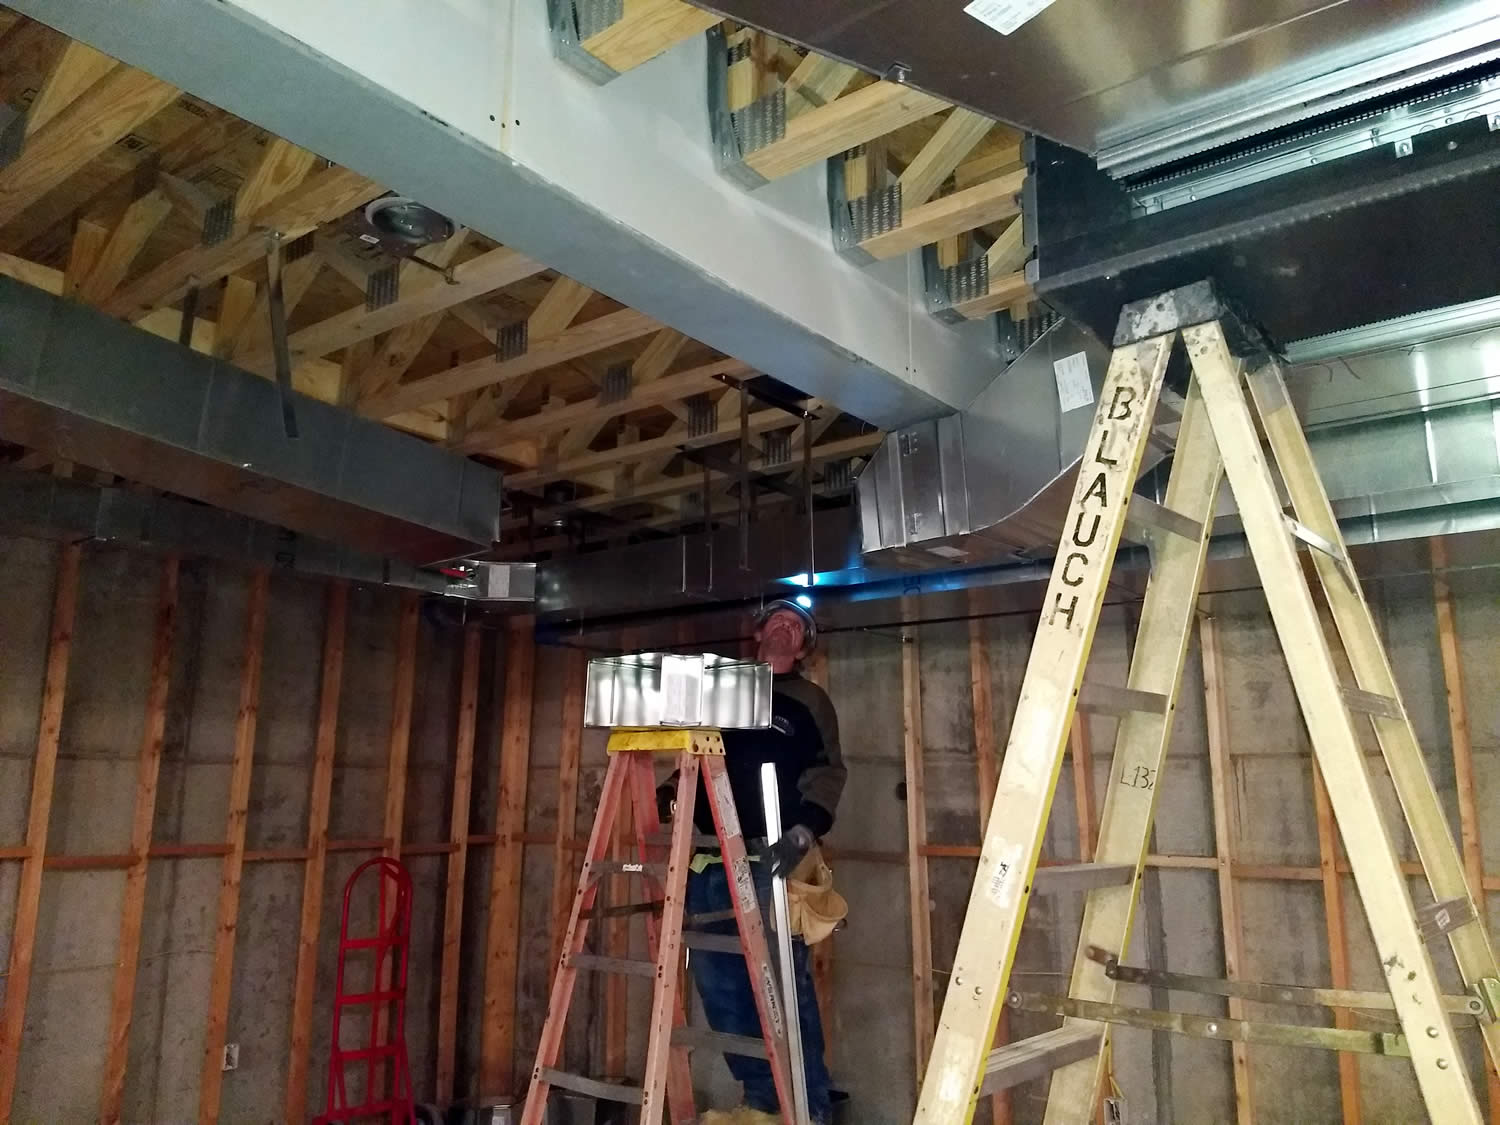 14 March 2019 - Installing HVAC ducts in basement of temple.